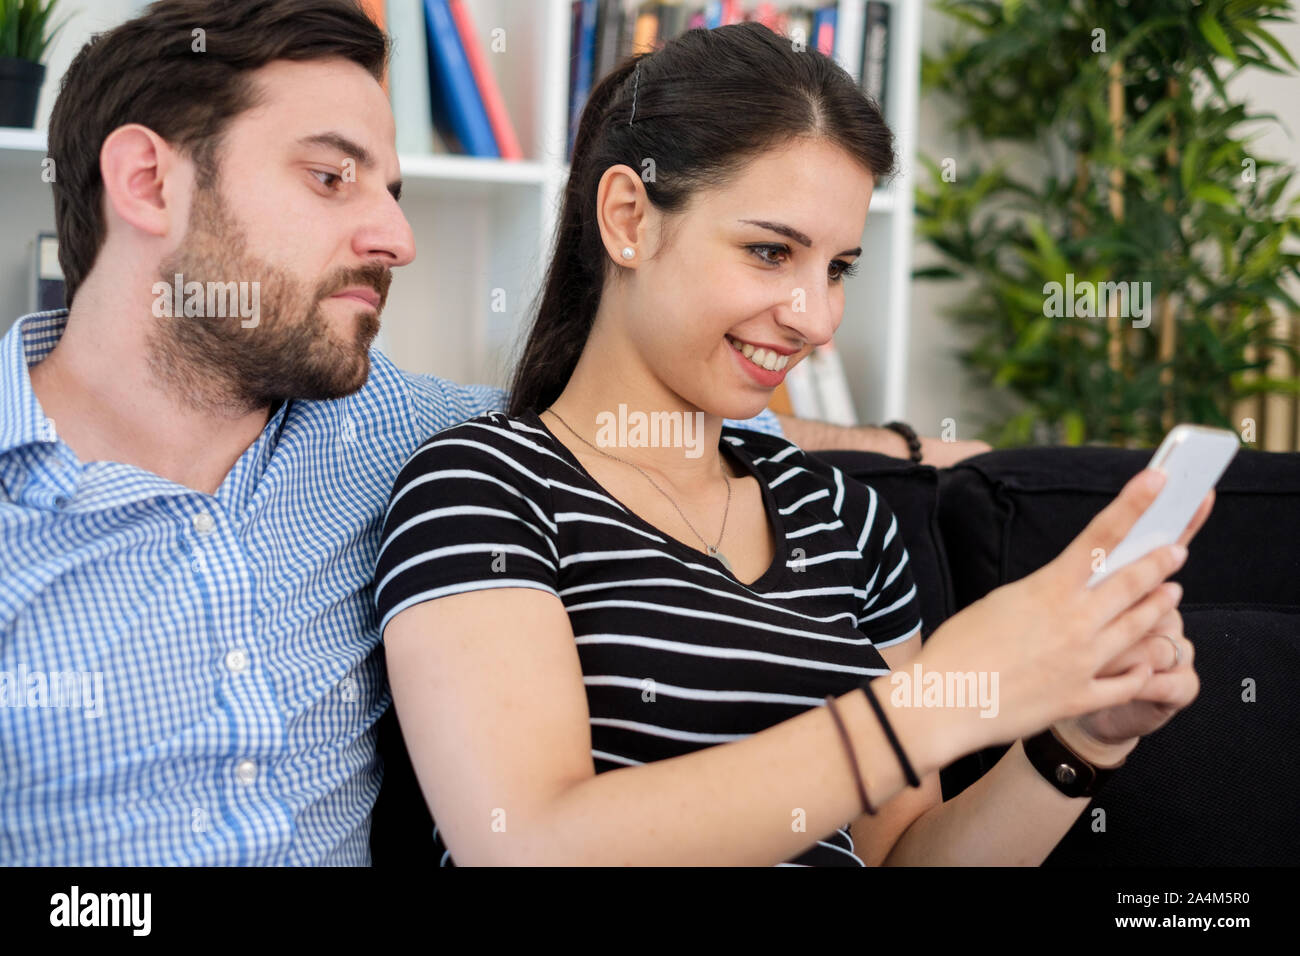 Jealous man spying girlfriend and watching her mobile phone Stock Photo